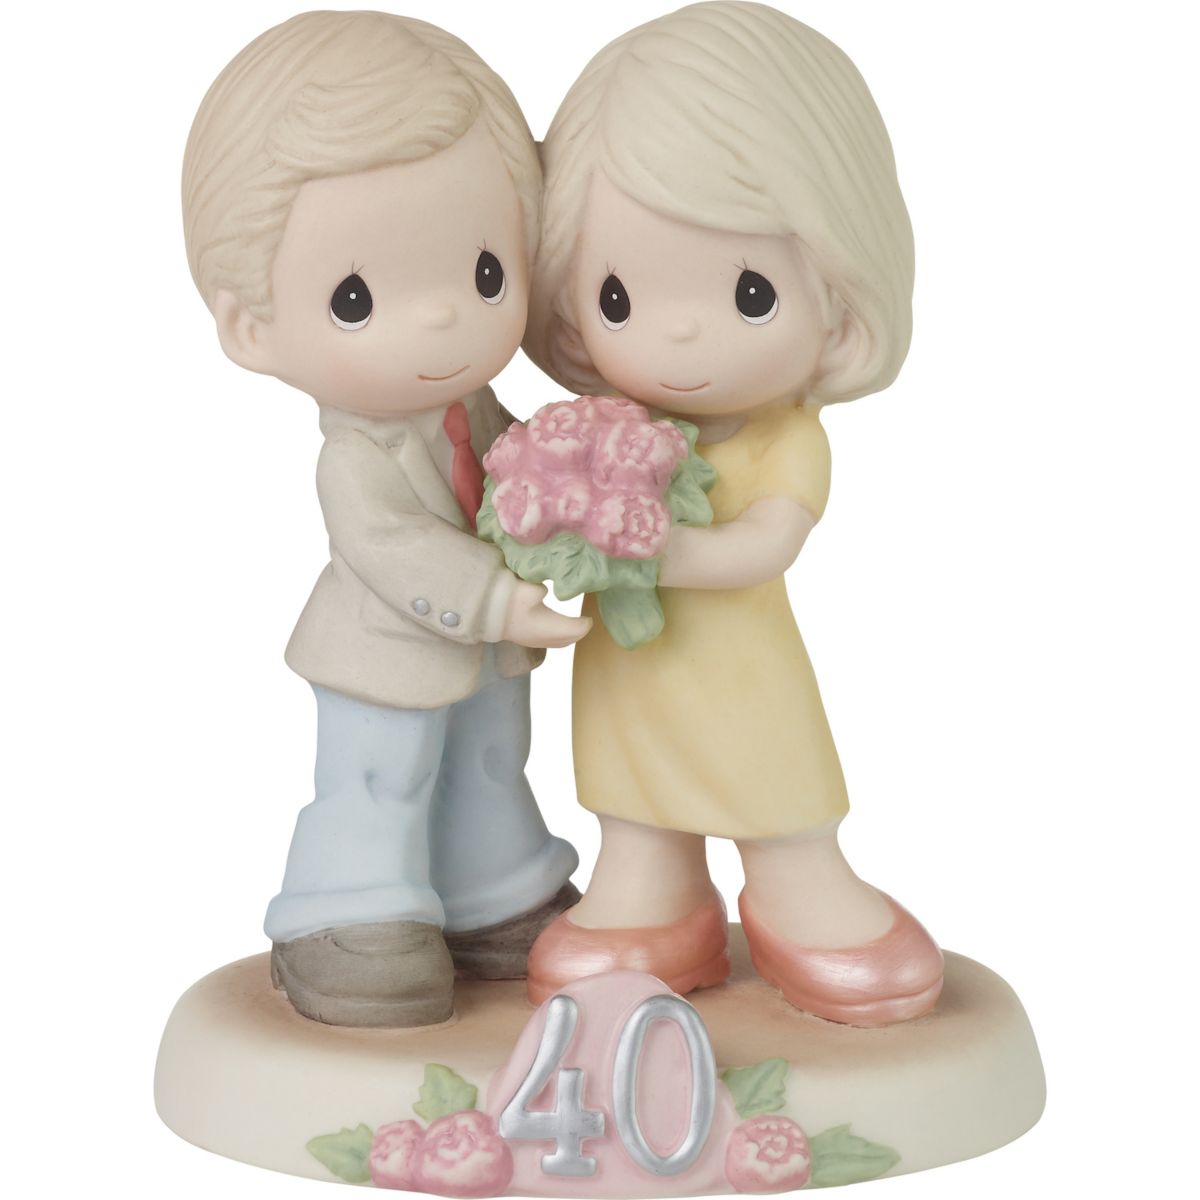 Precious Moments Forty Loving Years Together Bisque Porcelain Figurine Precious Moments